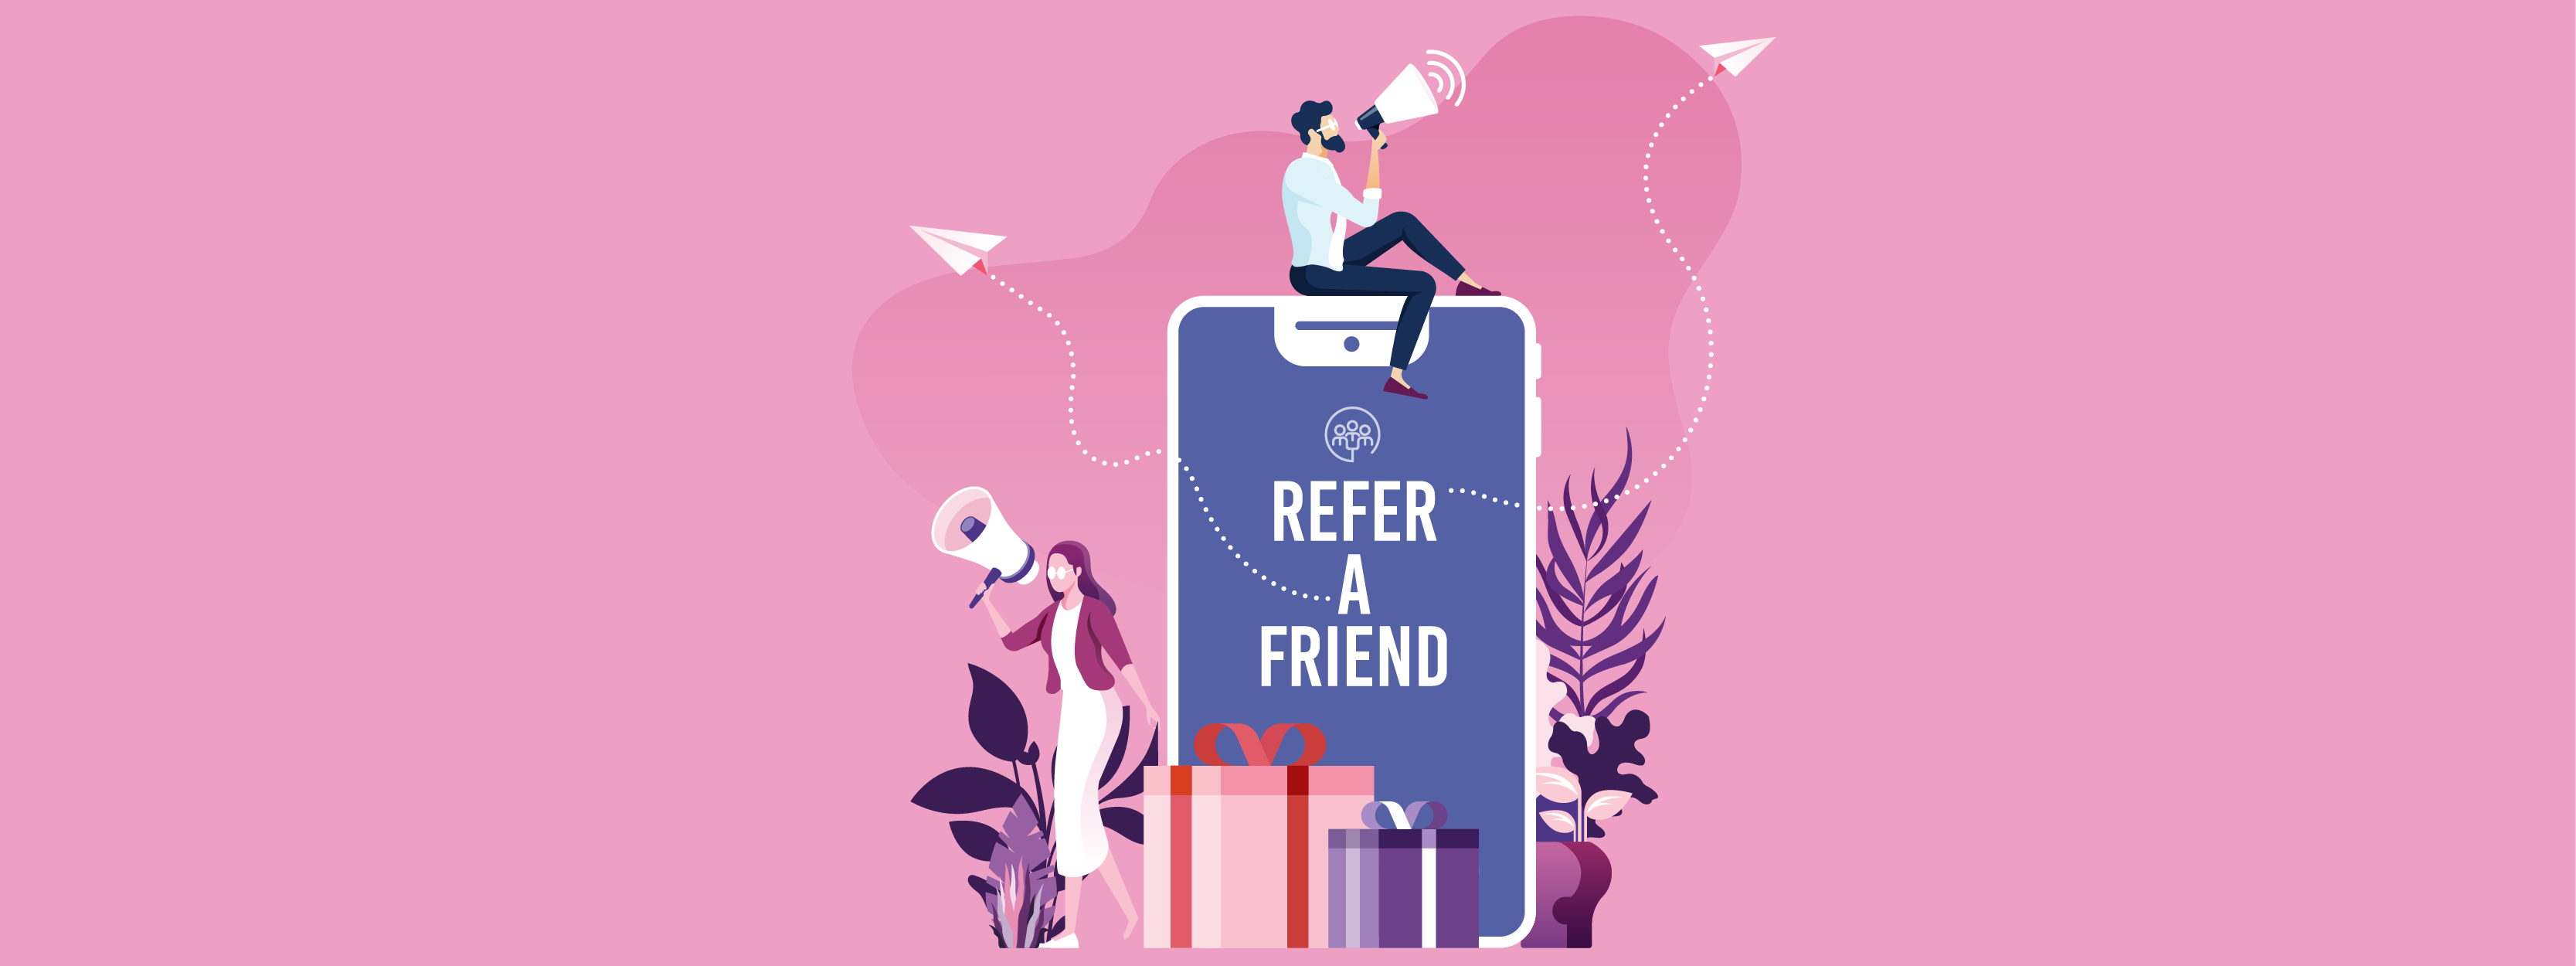 Build Referral Programs and Encourage Social Sharing